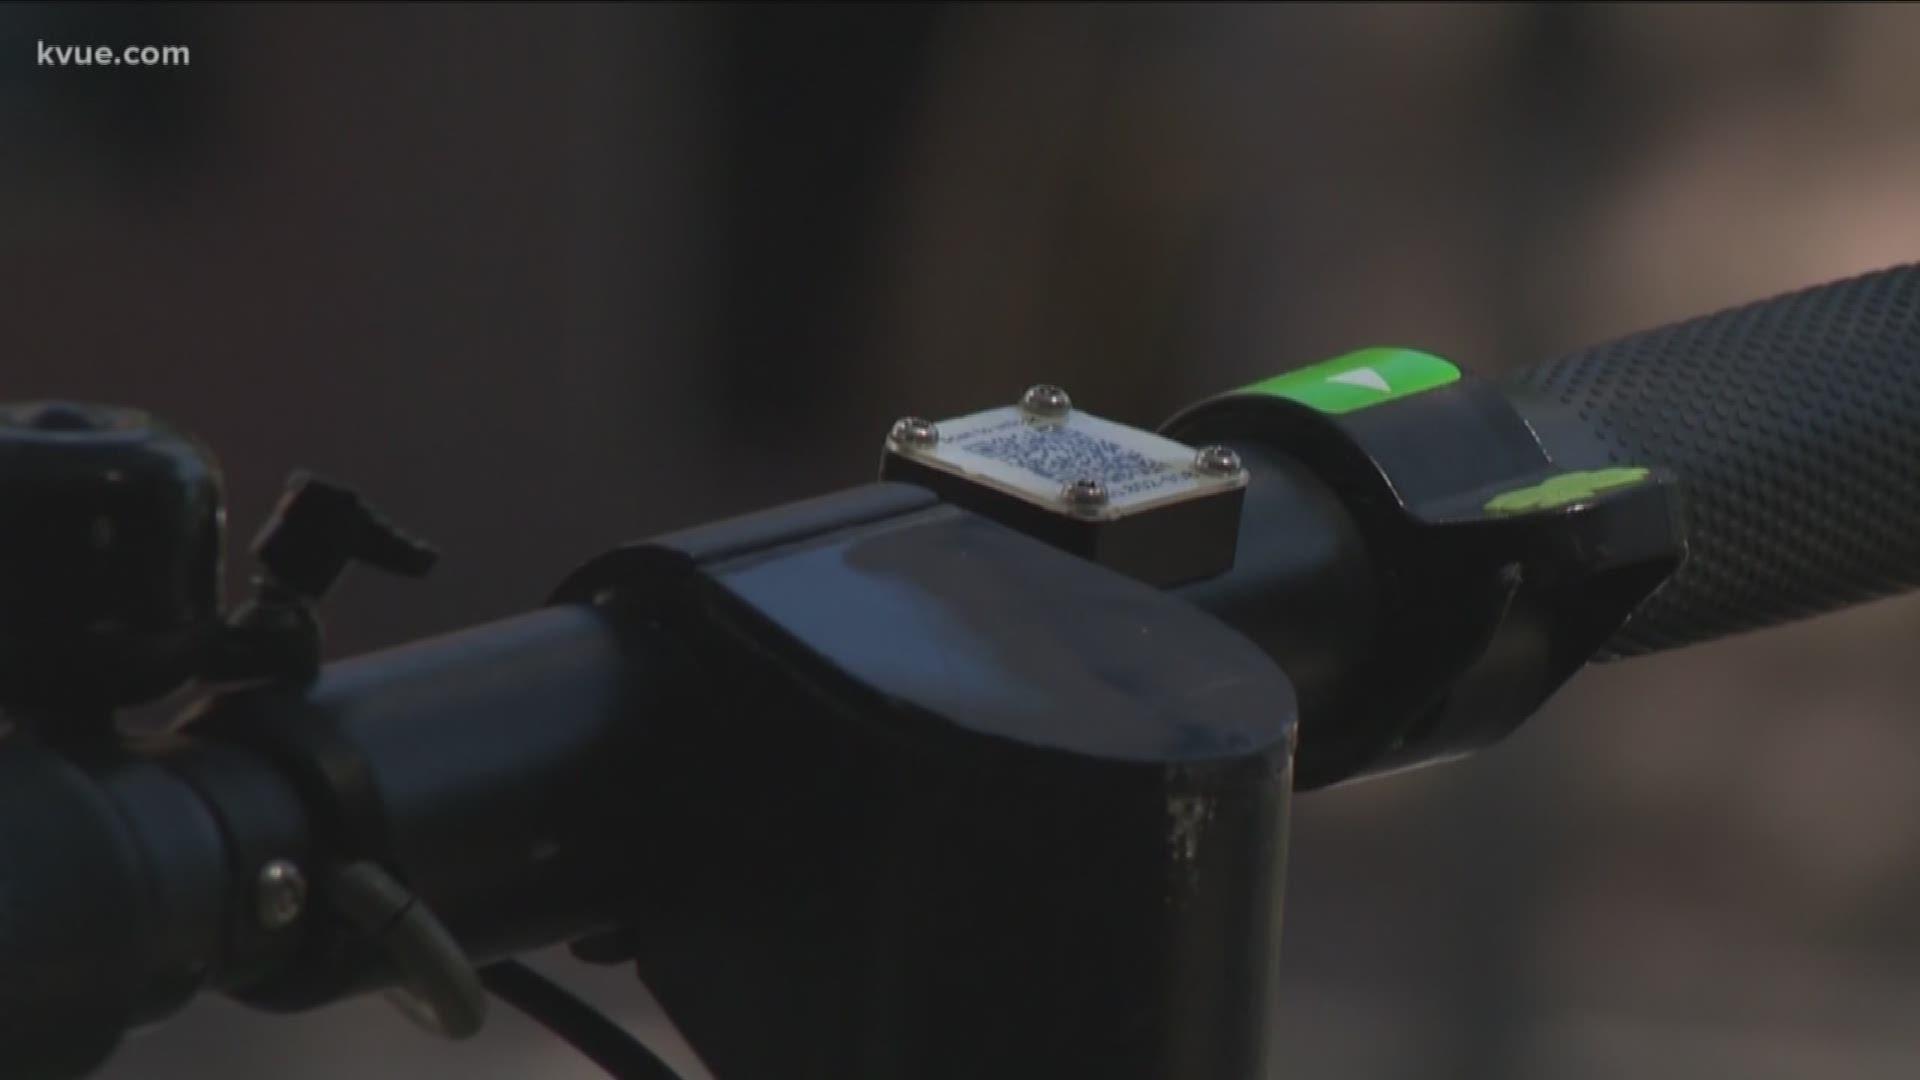 In an effort to "hold every dockless mobility company accountable to the rules," the City of Austin is punishing dockless scooter company Lime for violating a rule.
STORY: http://www.kvue.com/news/local/dockless-scooter-company-lime-gets-in-trouble-with-c